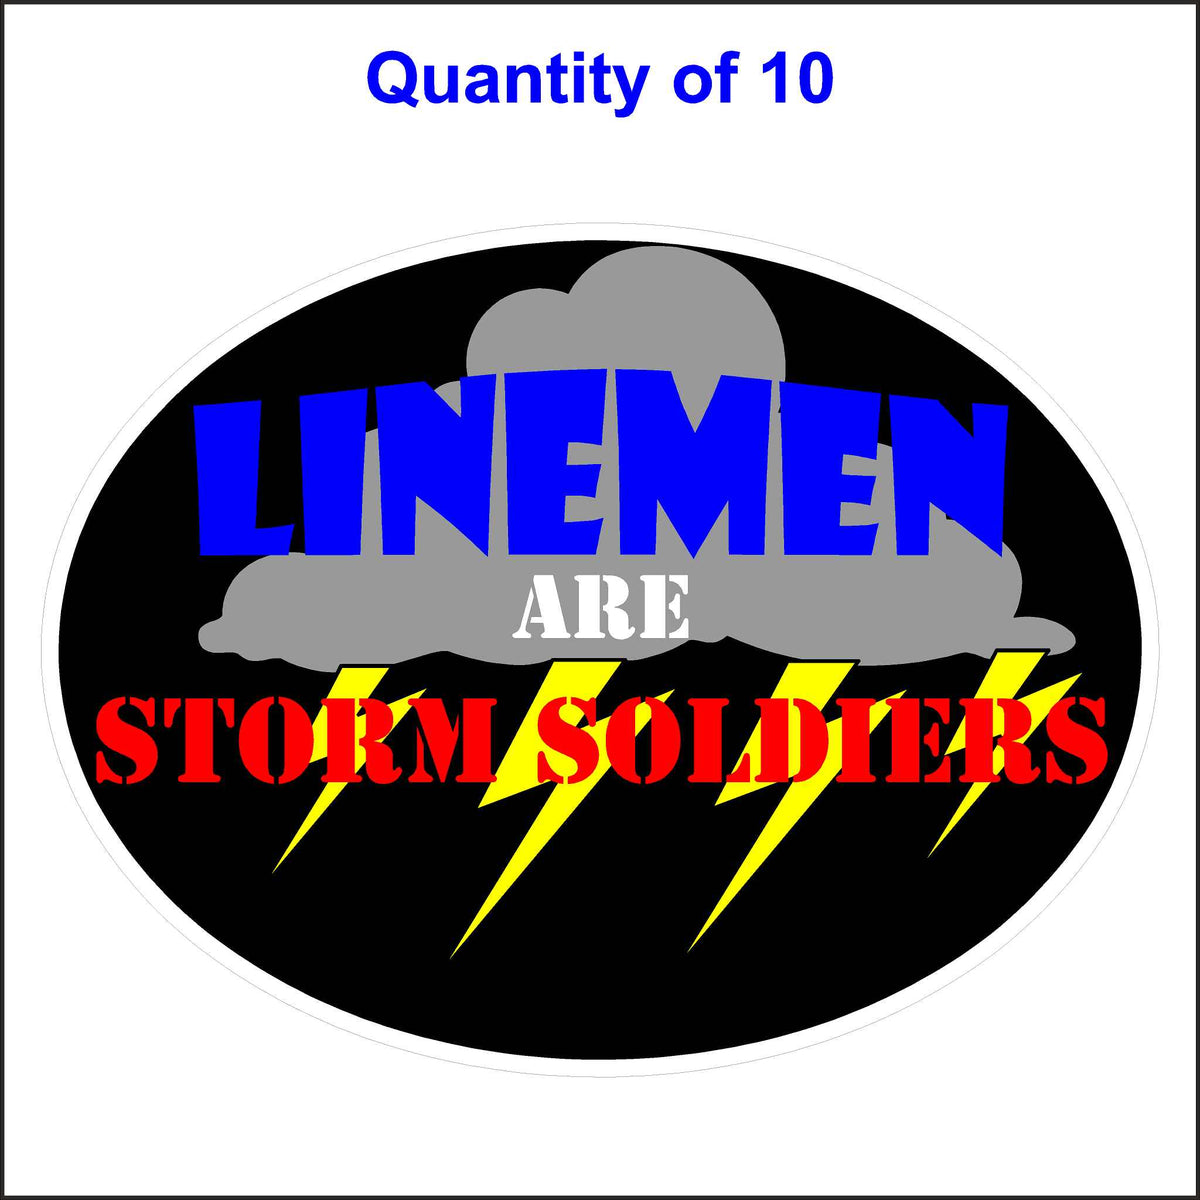 Black Lineman Are Storm Soldiers Stickers. 10 Quantity.